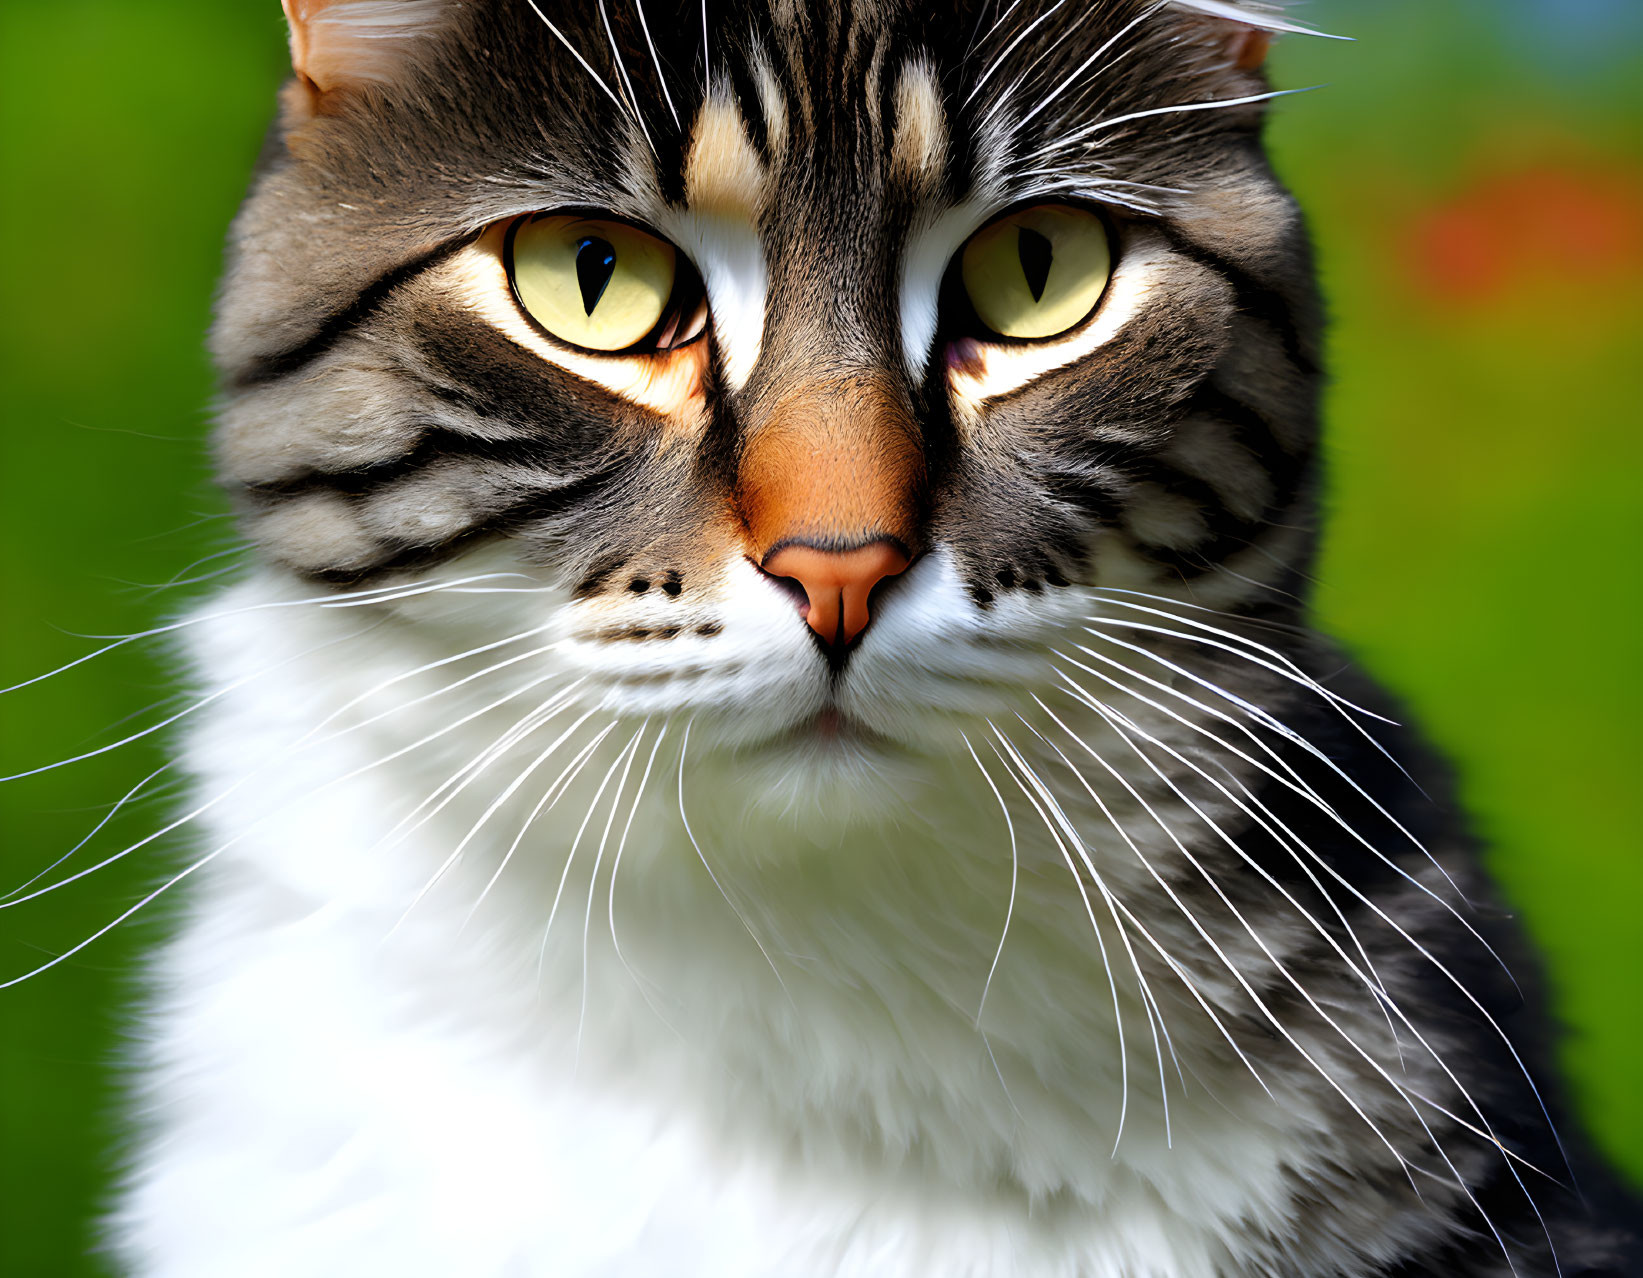 Tabby Cat with Yellow Eyes and Black Stripes on White Chin